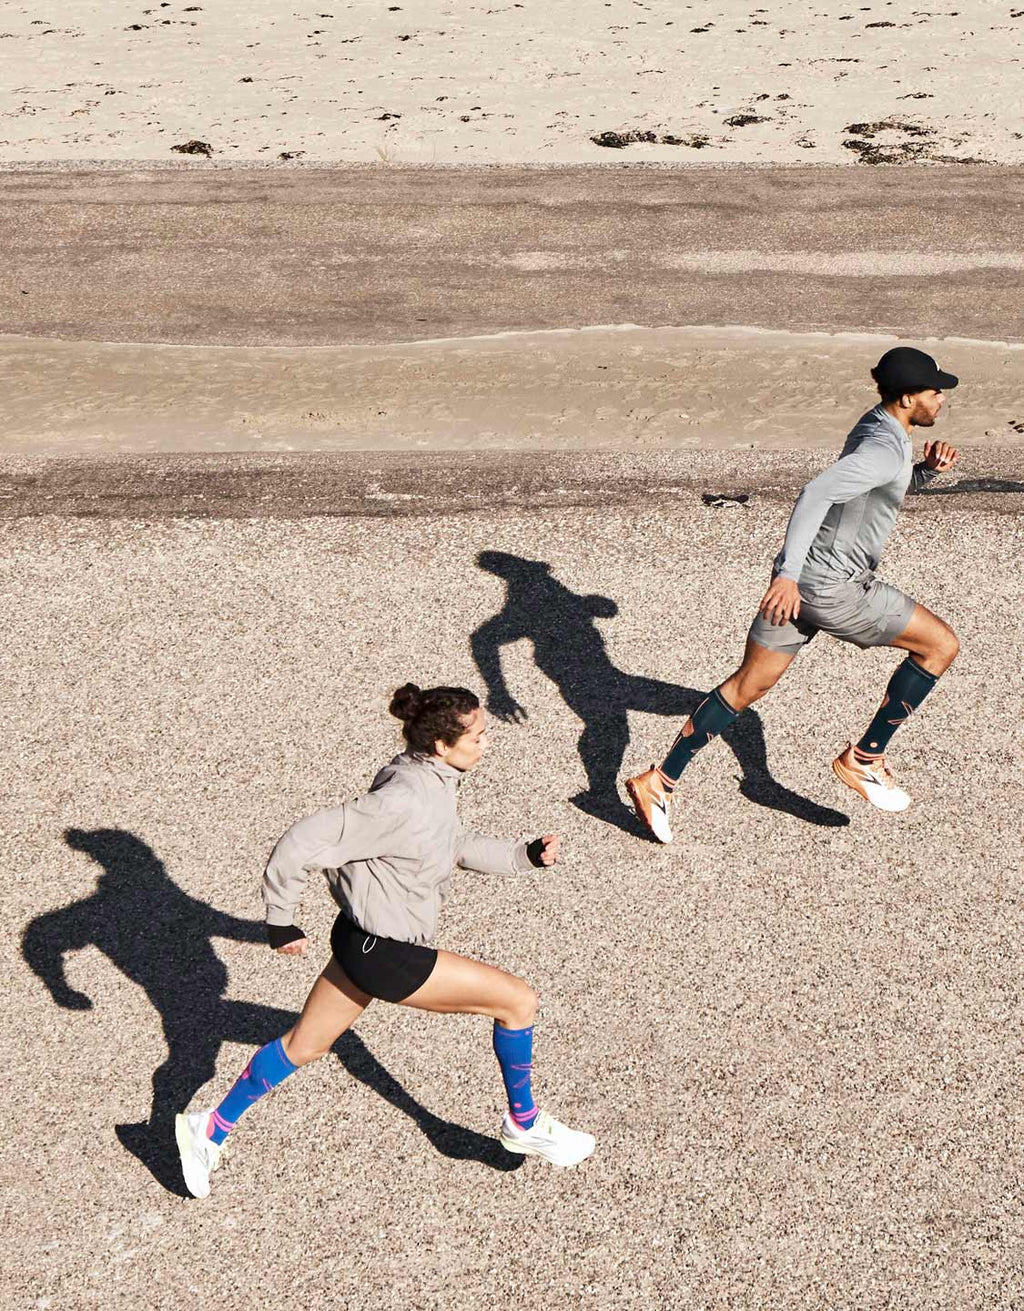 Two people running with their shadows behind them.